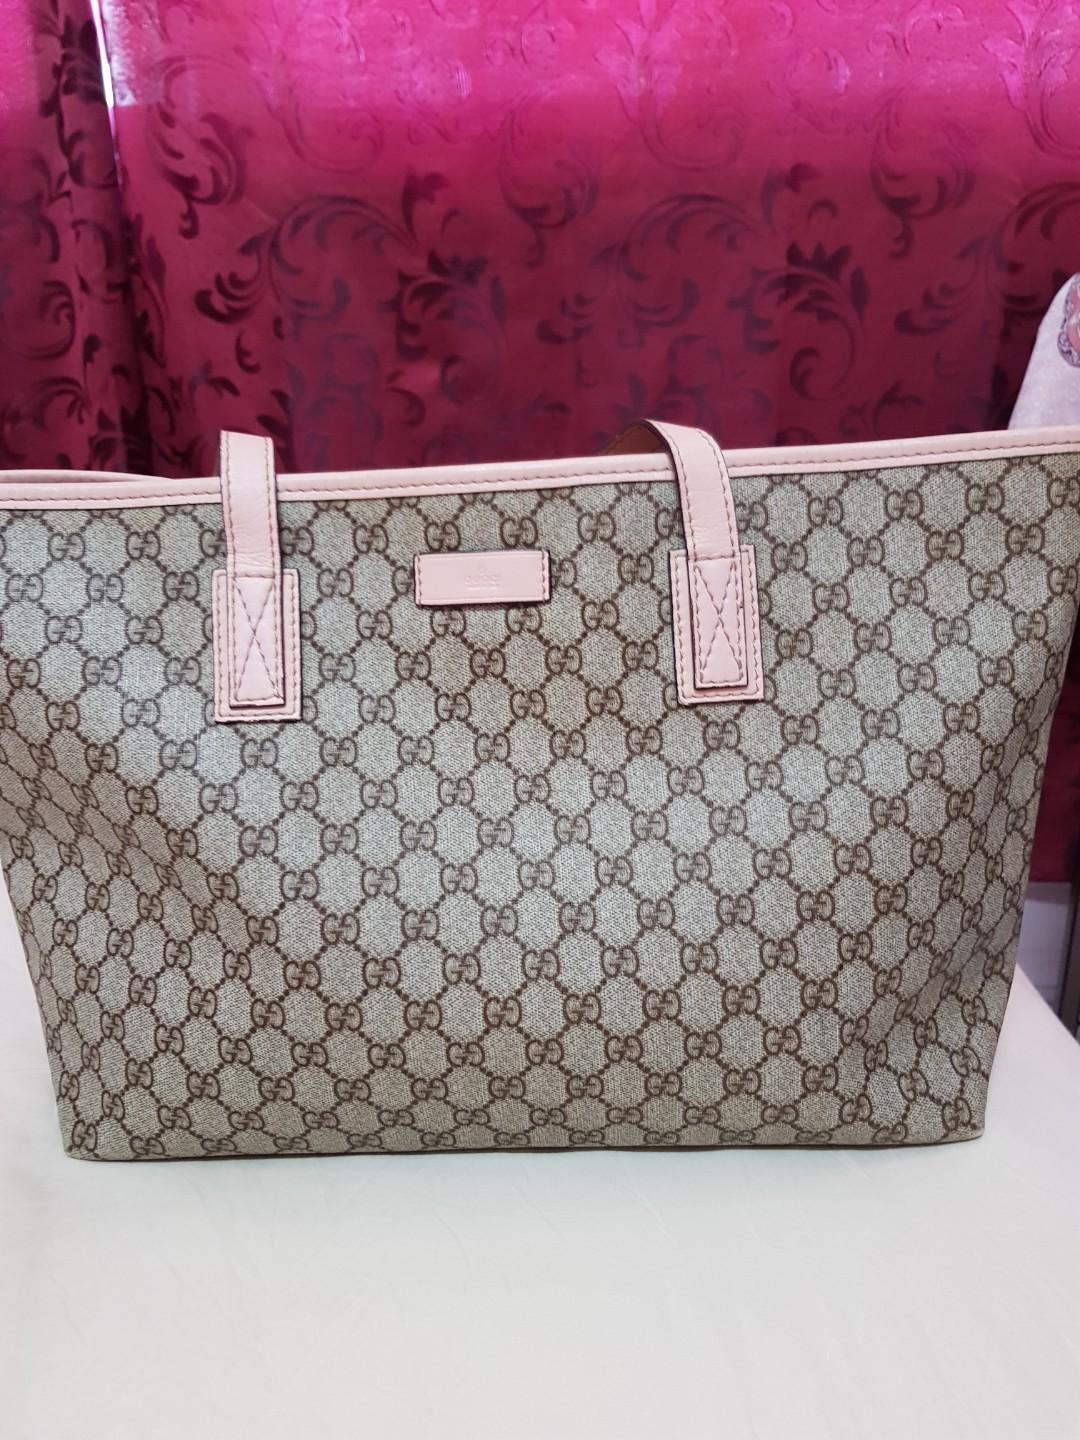 Still in good condition. The original Gucci box and bag is not included. | Gucci  handbags crossbody, Gucci crossbody bag, Gucci handbags outlet